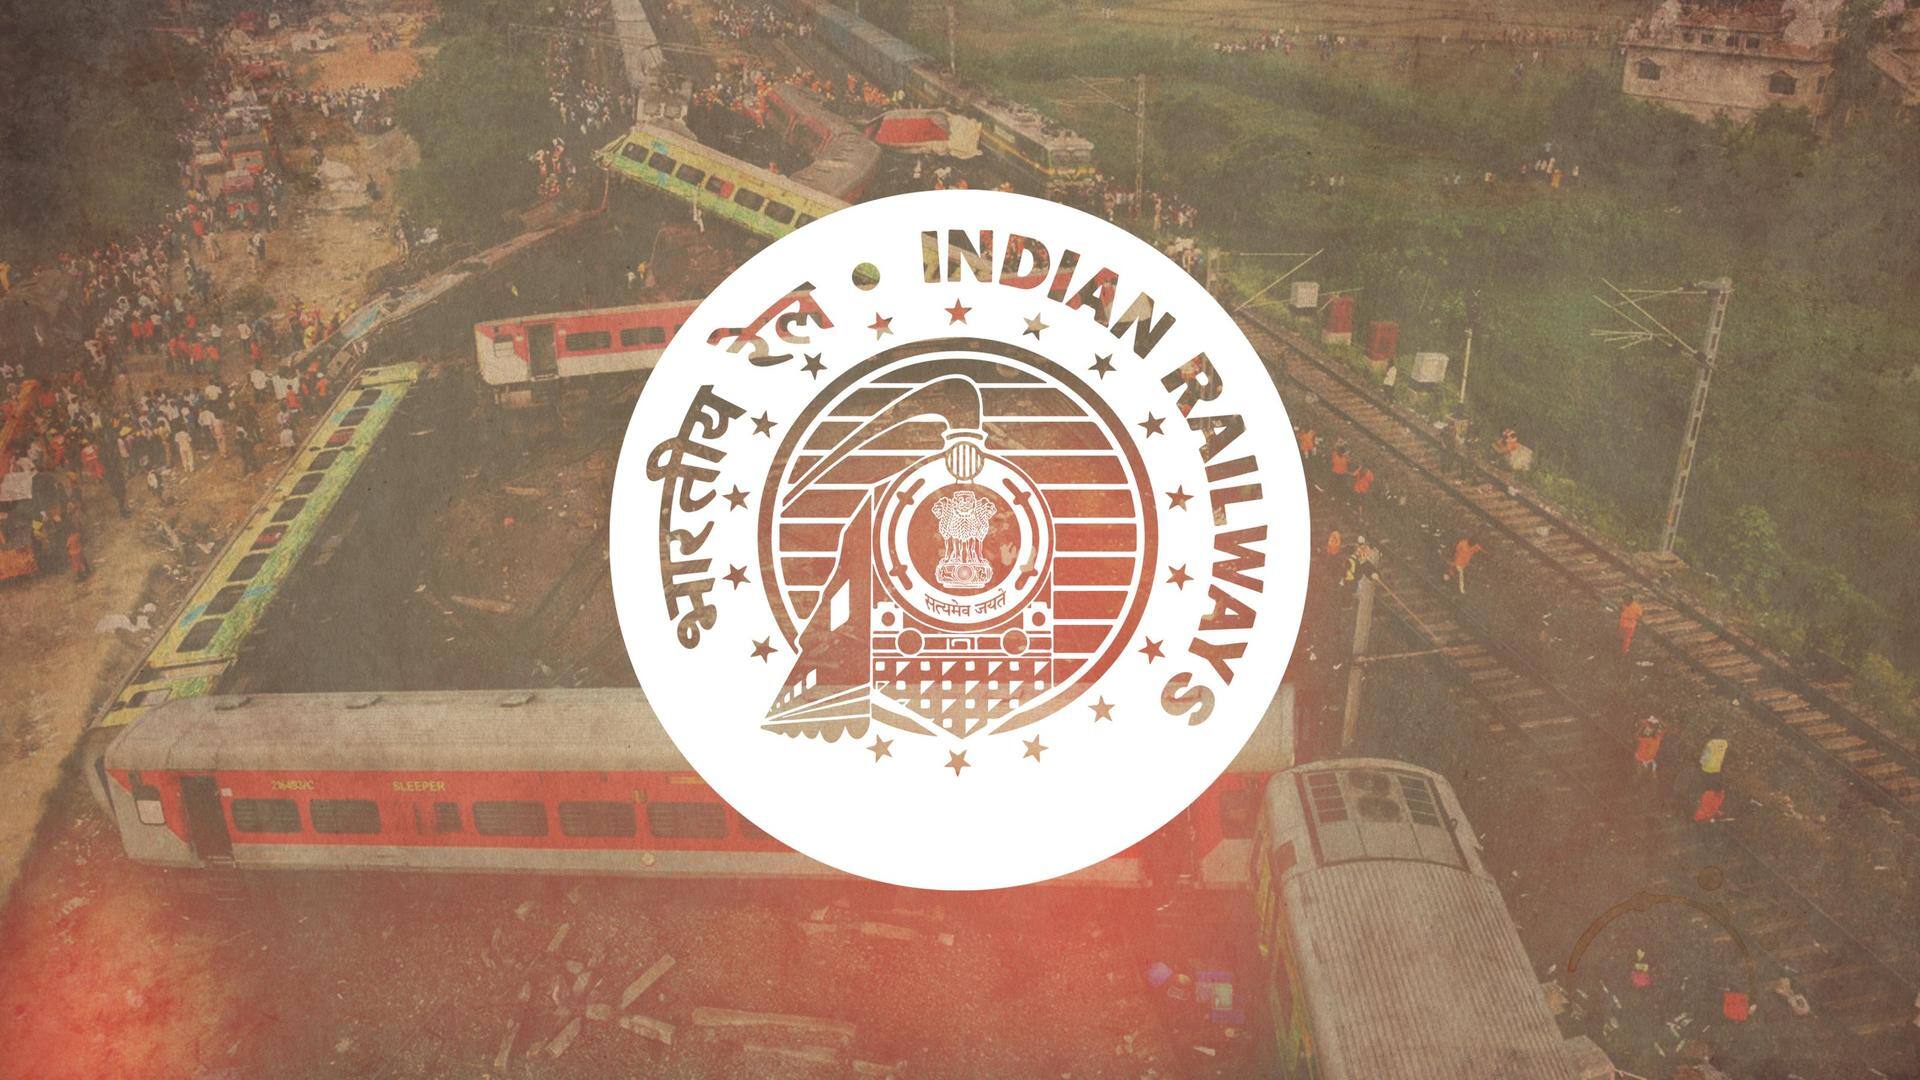 Human errors caused 192 train accidents in India since 2017